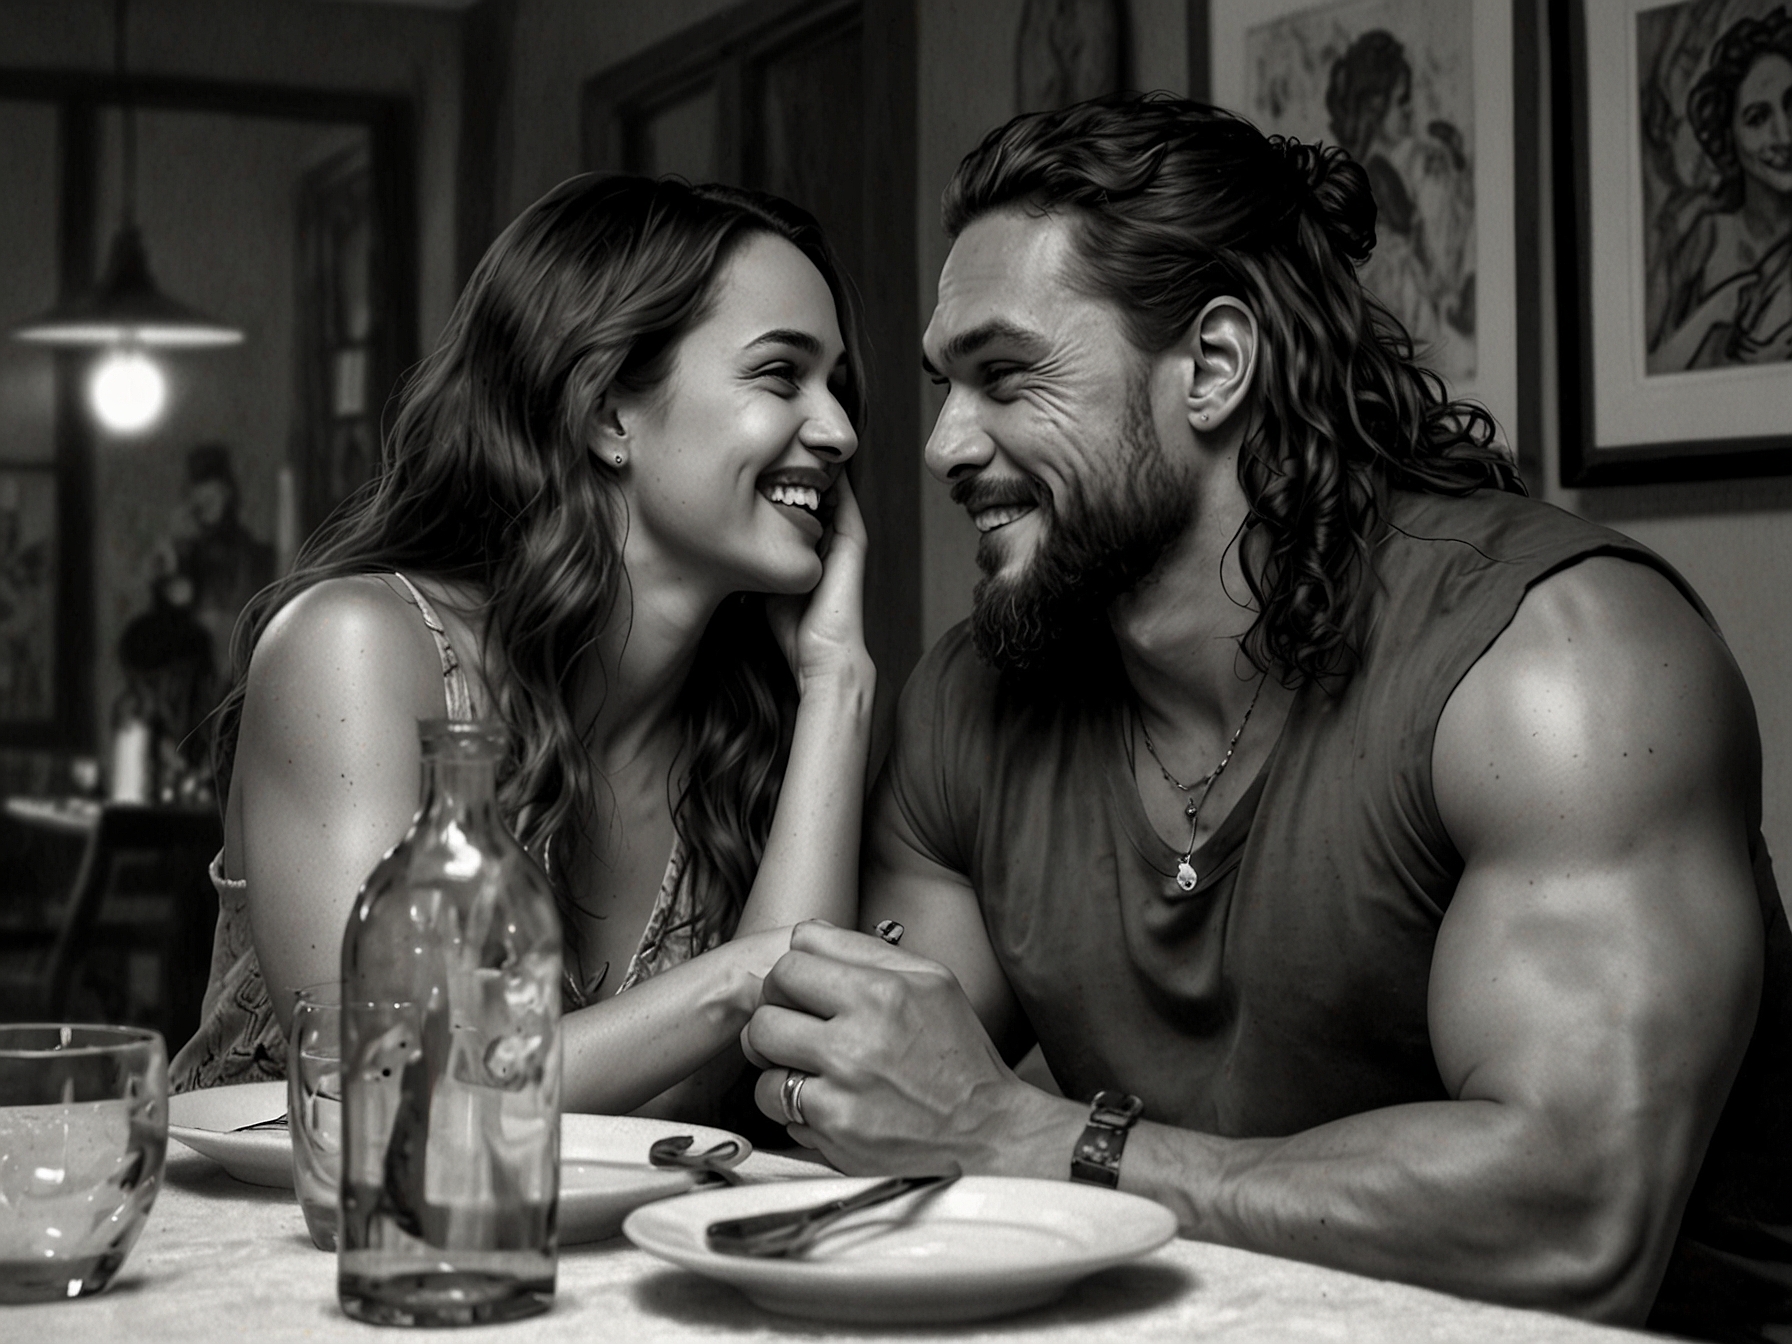 Jason Momoa and Adria Arjona share a candid moment during a cozy dinner, showcasing their deep connection and affection for each other.